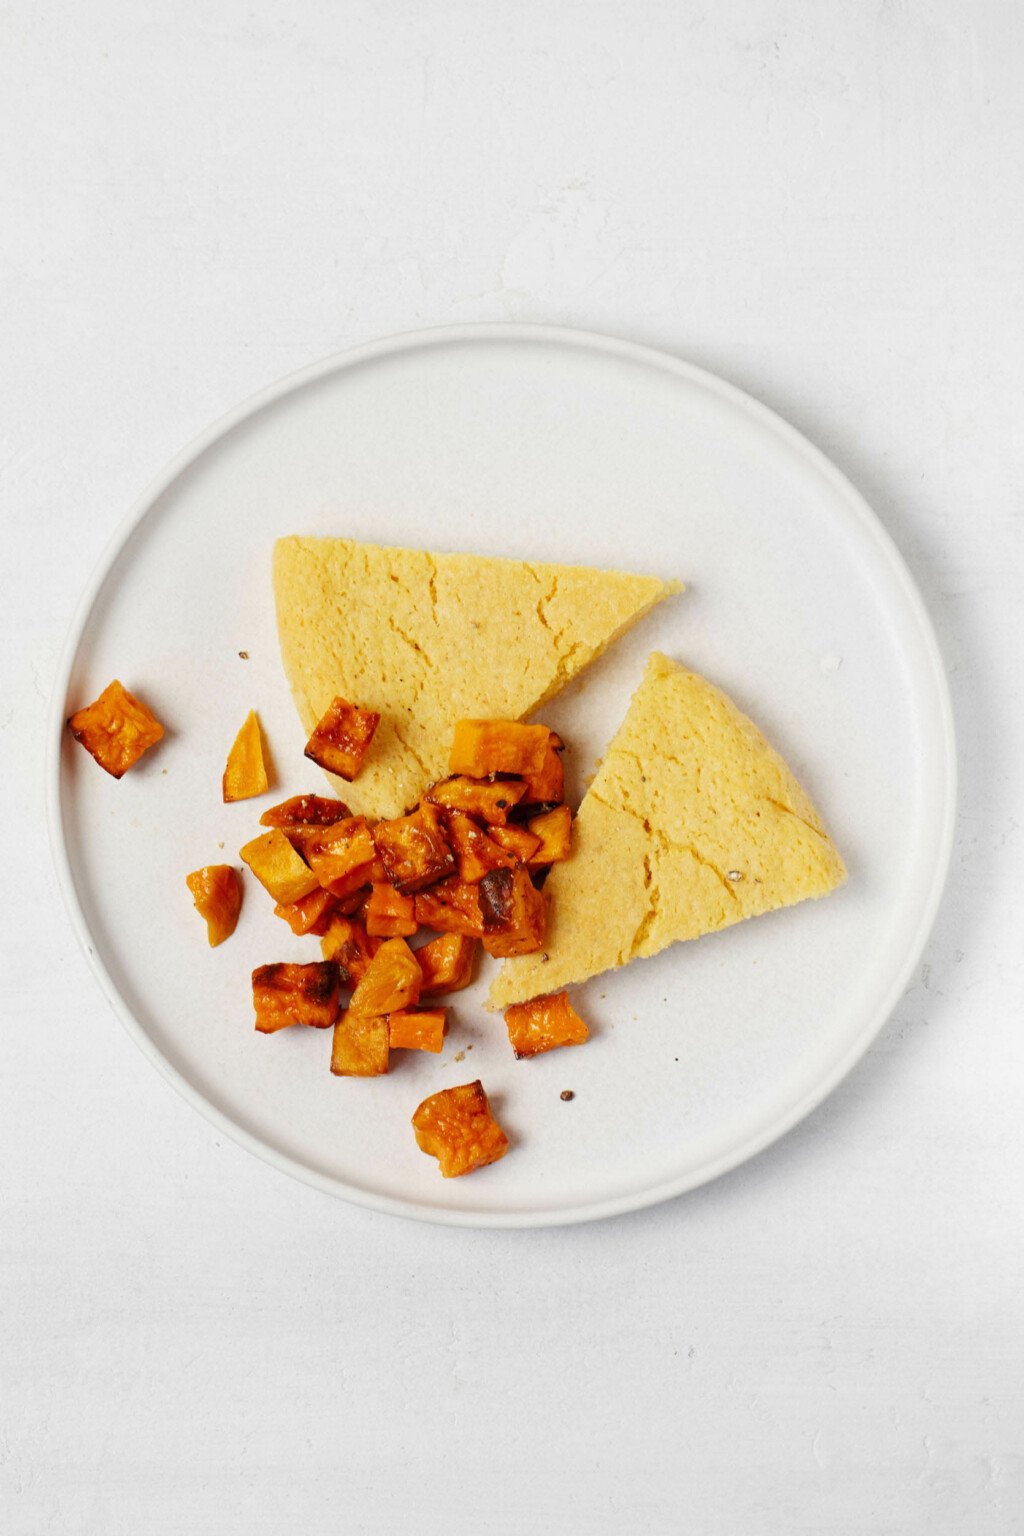 Slices of a vegan chickpea frittata are accompanied by roasted sweet potato cubes on a round plate.